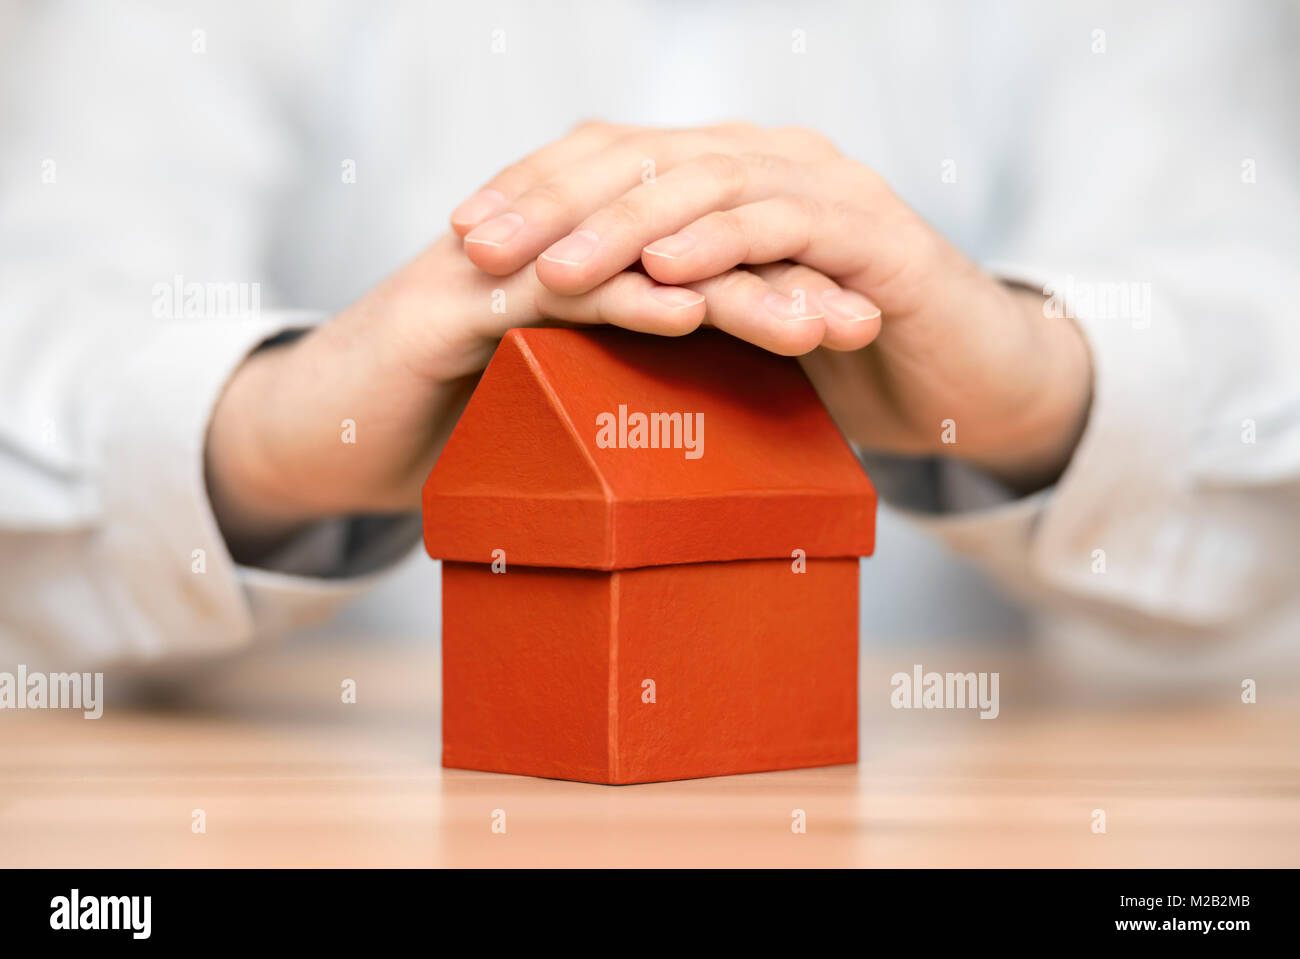 Small orange house protected by hands Stock Photo